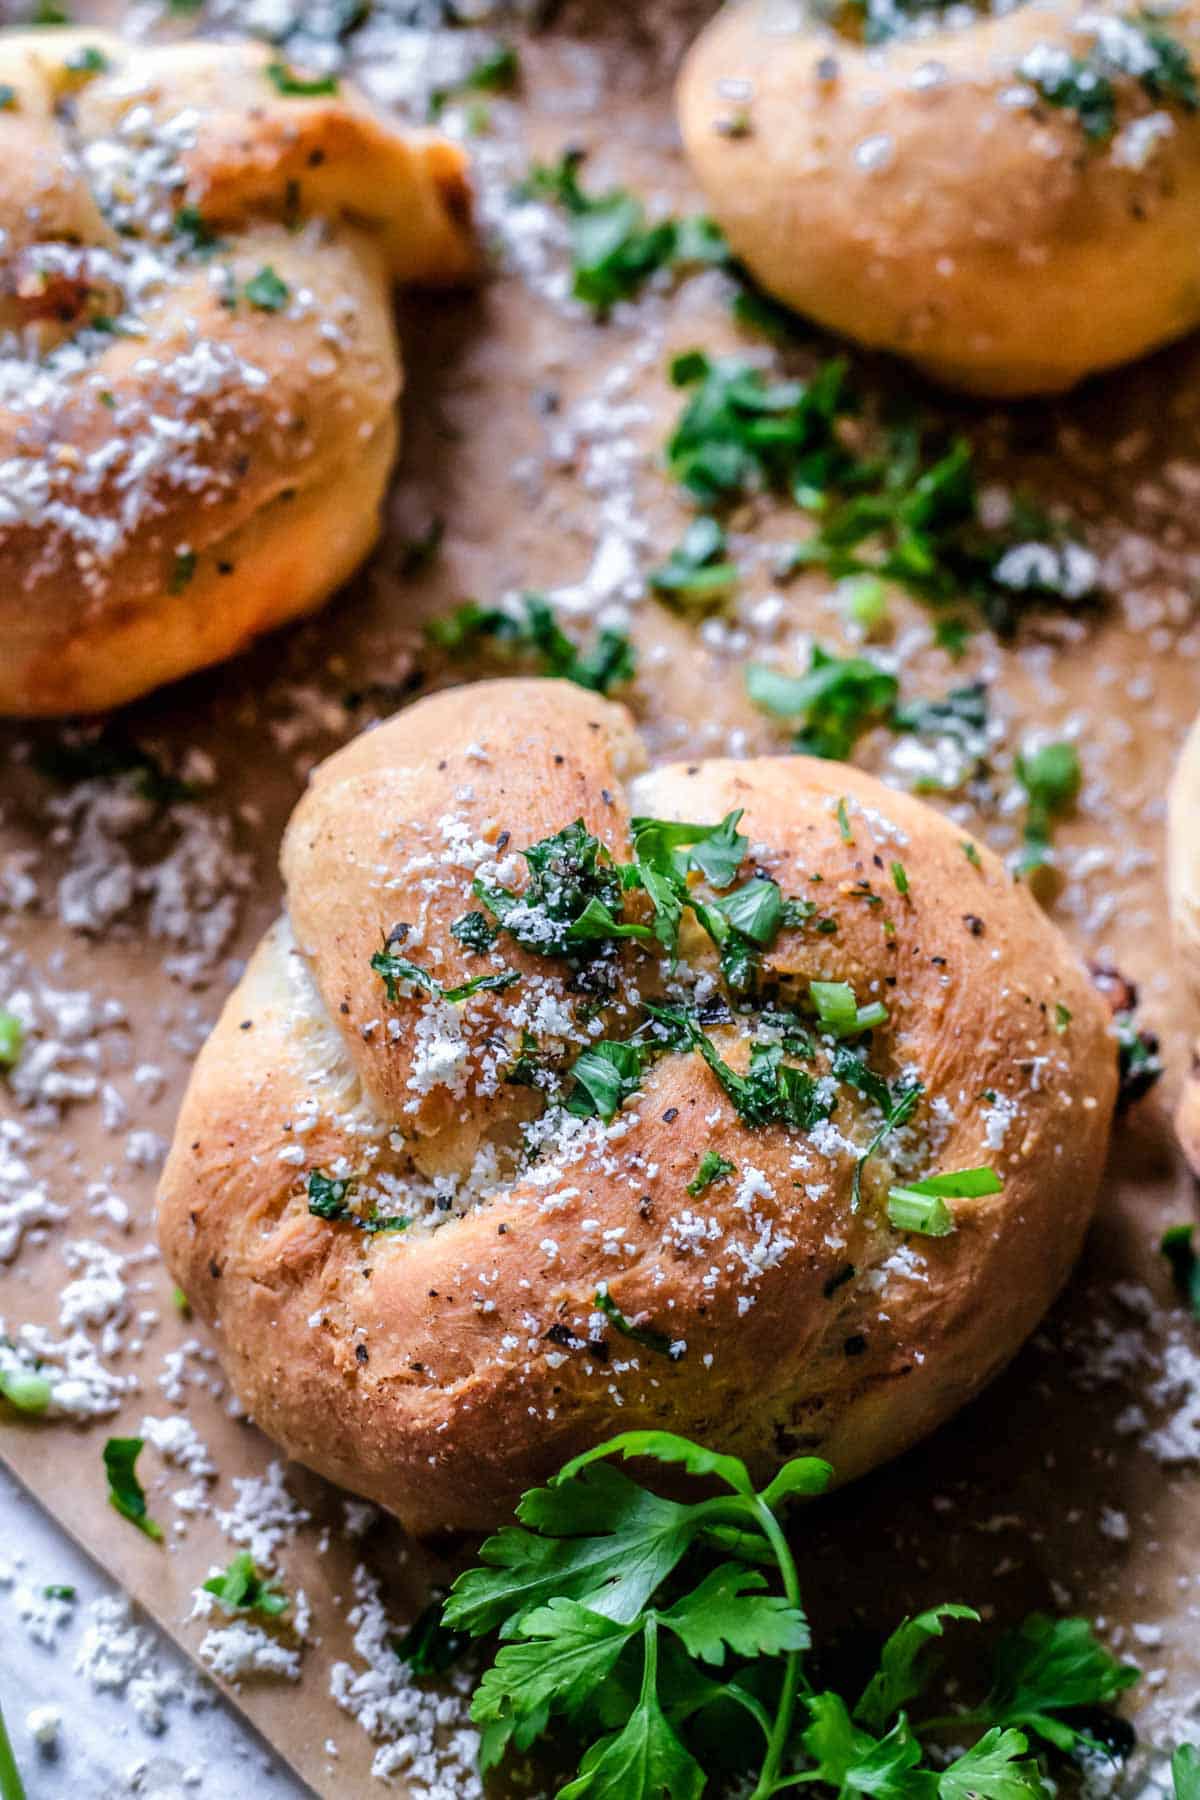 Garlic knot sprinkled with parmesan cheese and fresh parsley